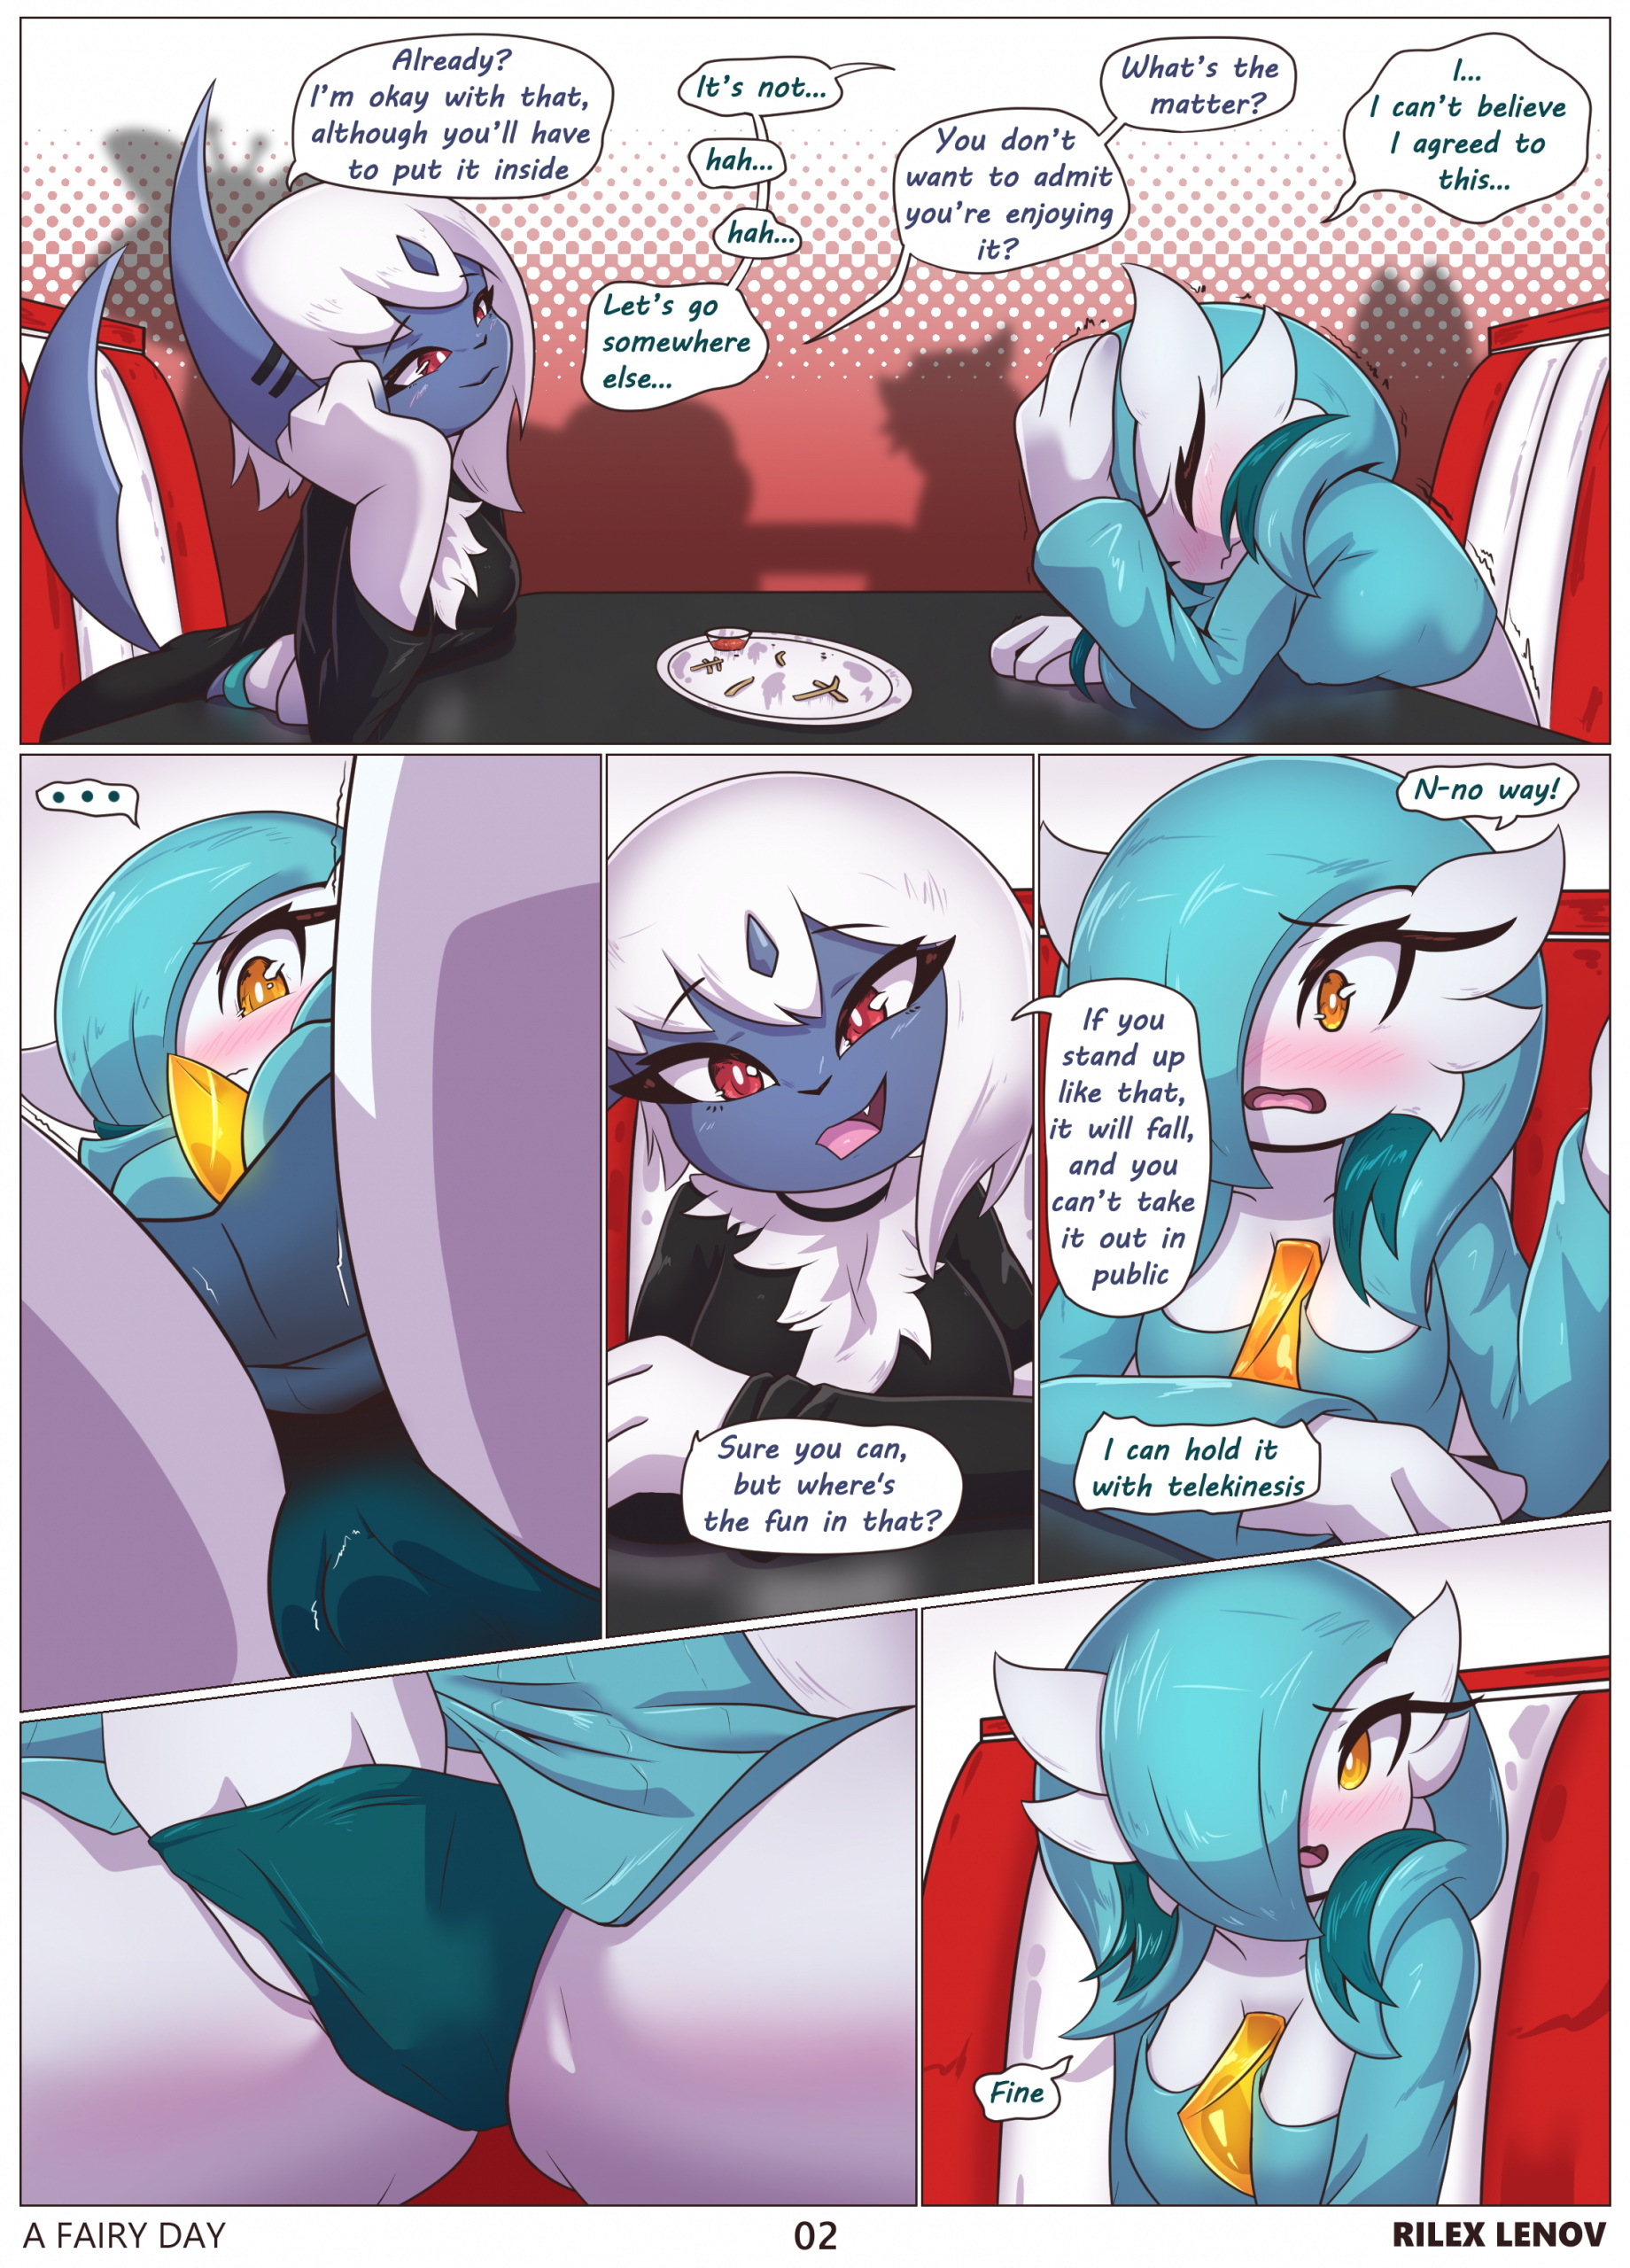 A Fairy Day - Page 2